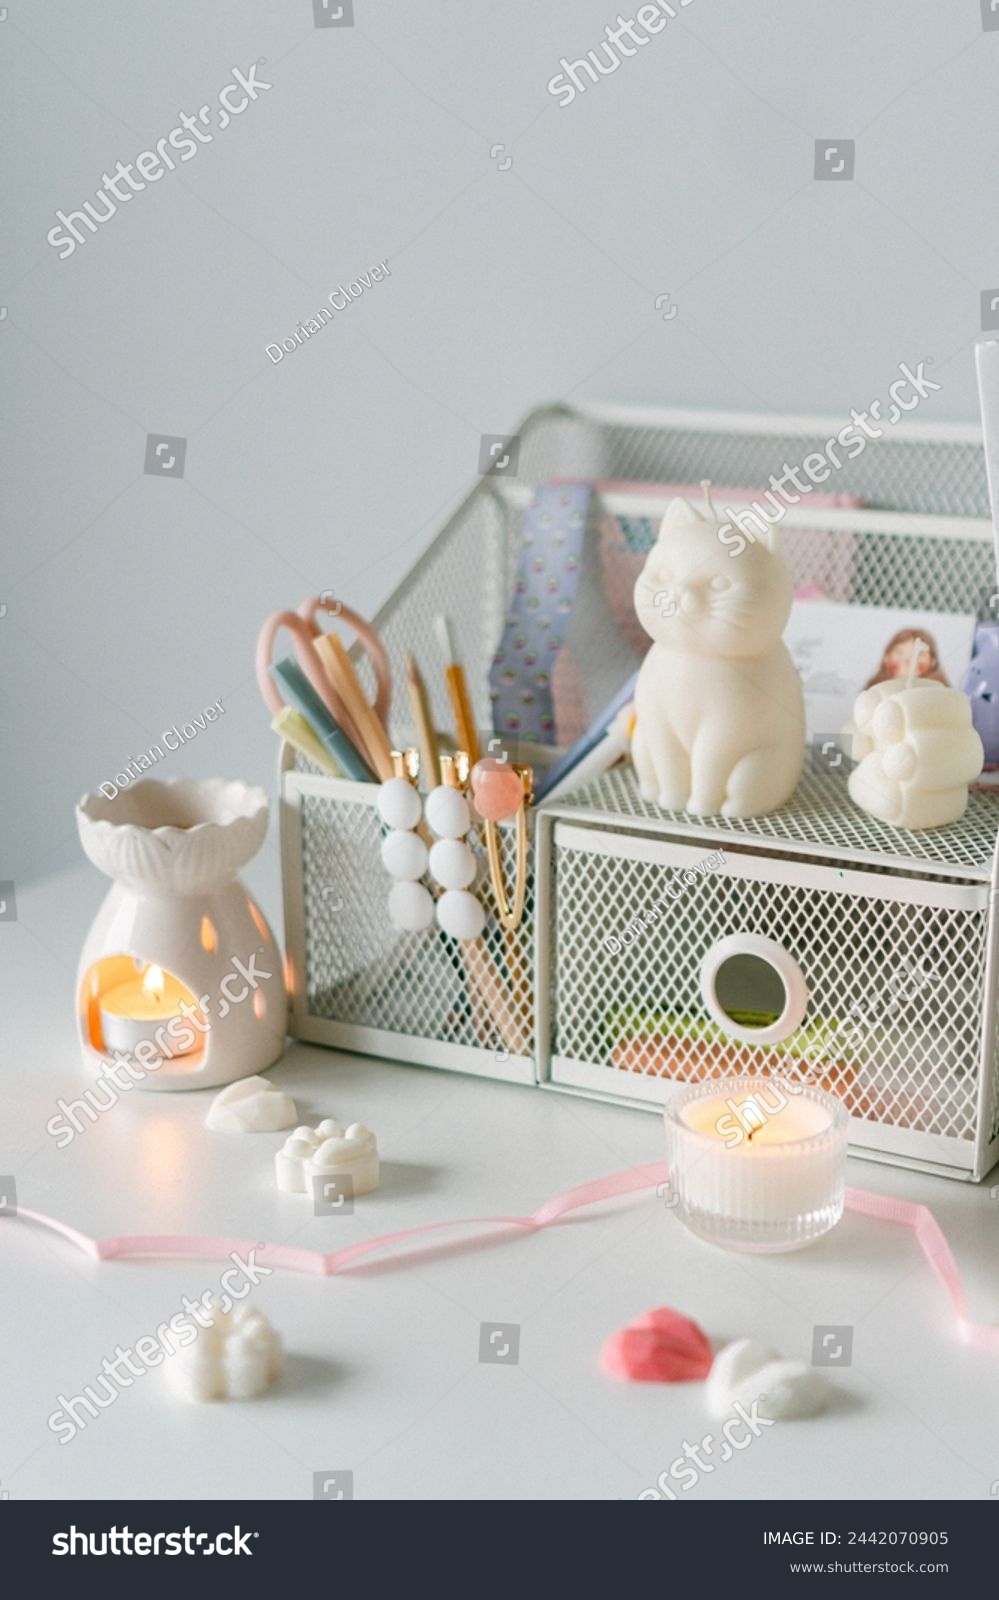 A charming workspace accented with a whimsical cat figurine, elegant stationery, and warm candlelight, exuding tranquility and style. #2442070905